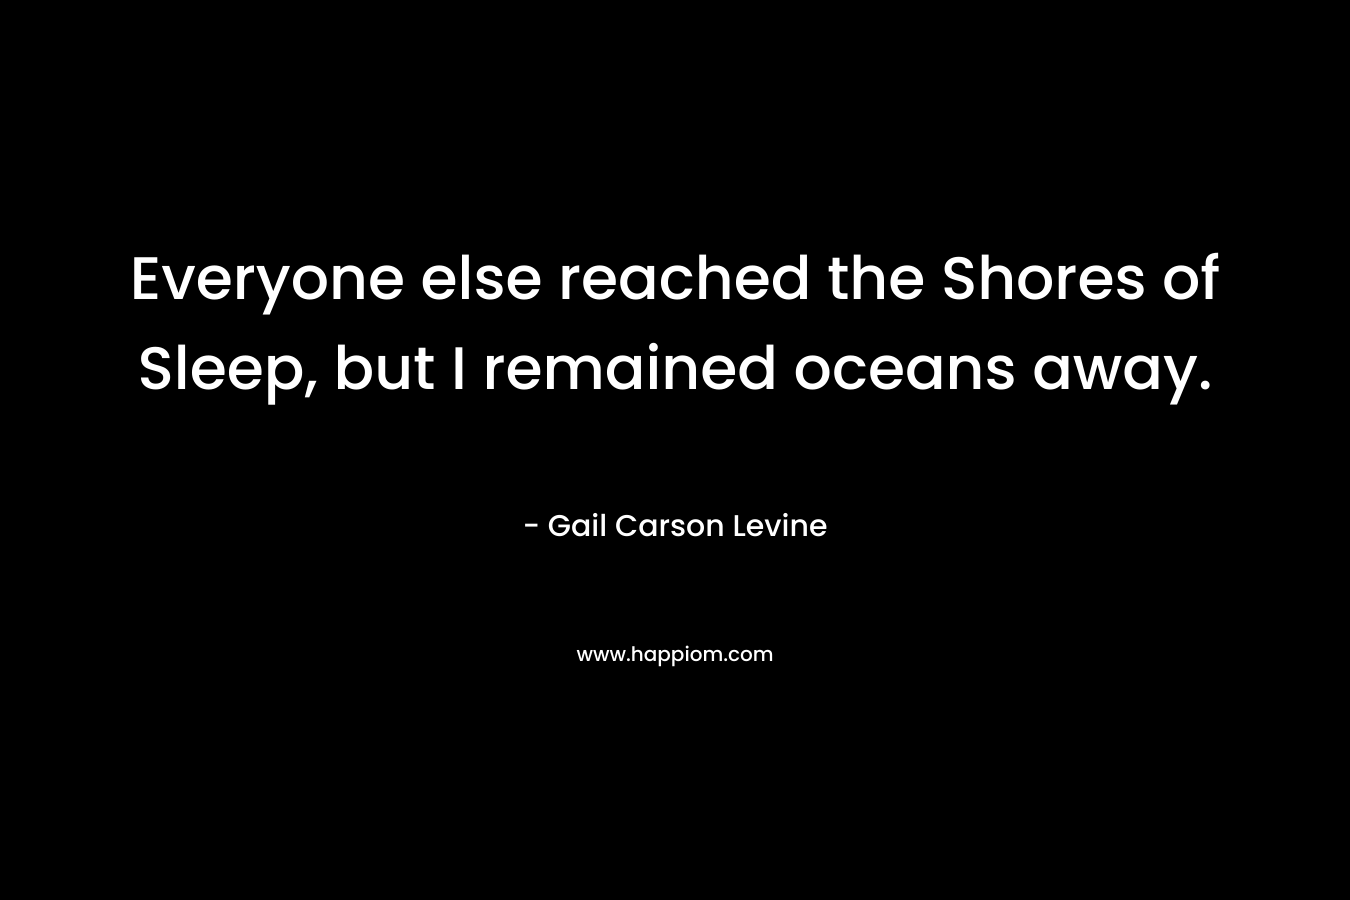 Everyone else reached the Shores of Sleep, but I remained oceans away. – Gail Carson Levine